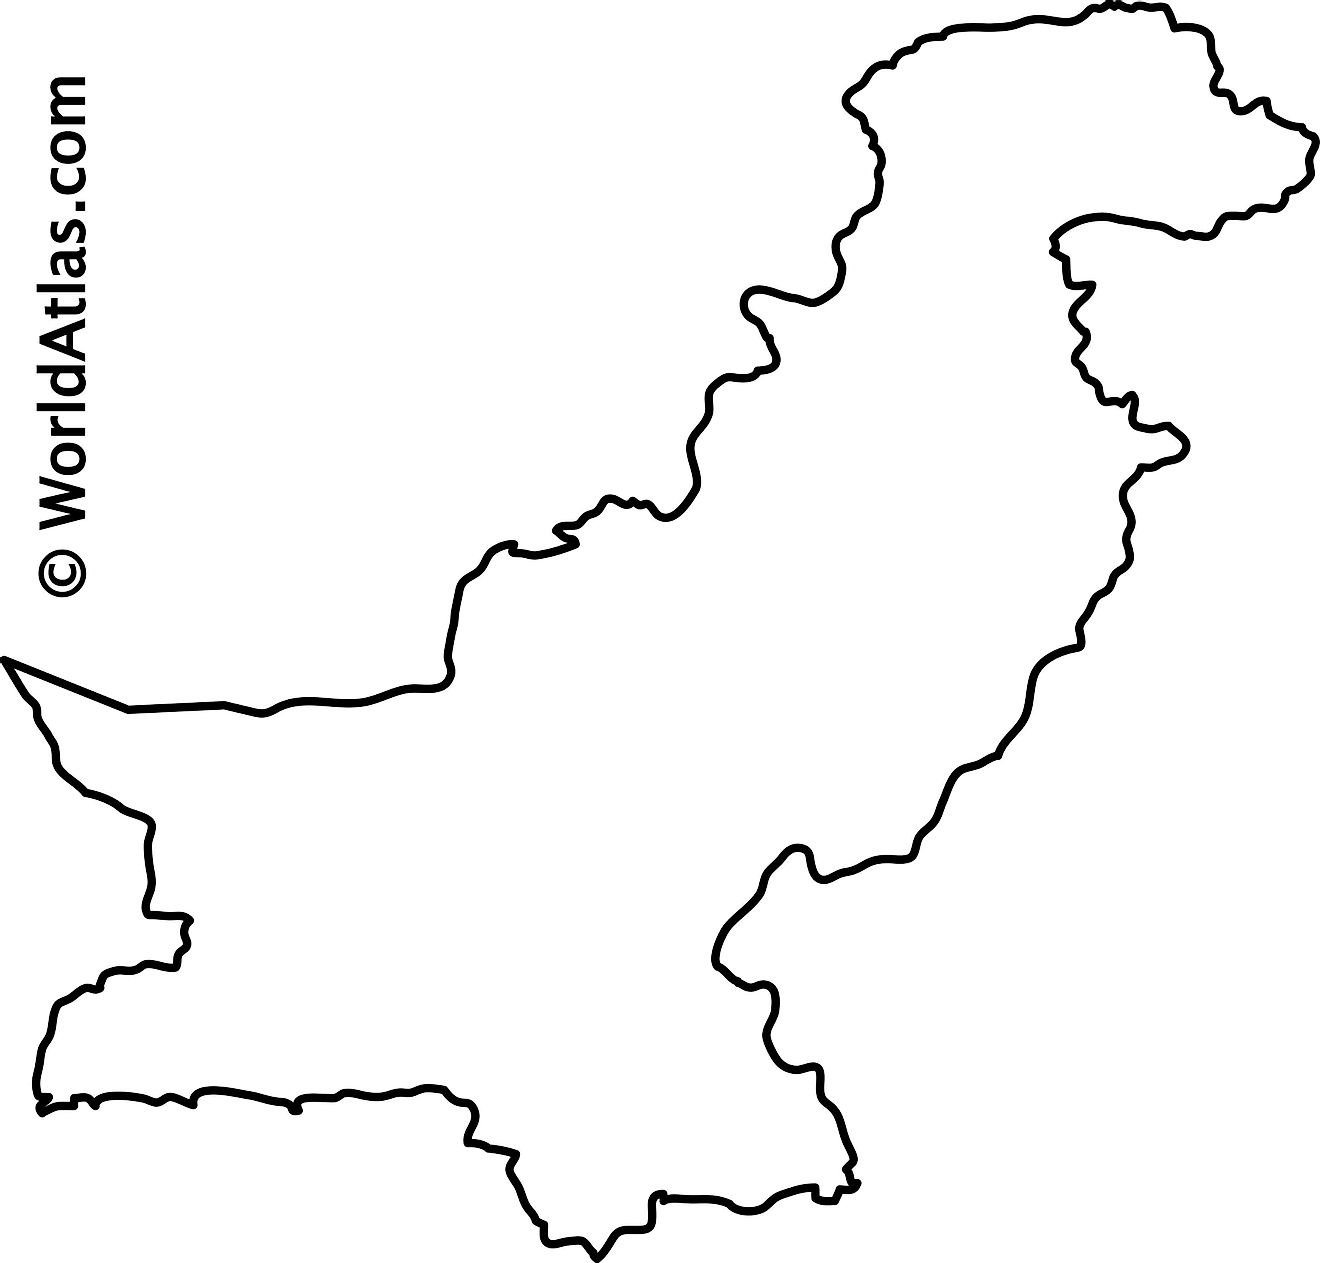 Blank Outline Map of Pakistan